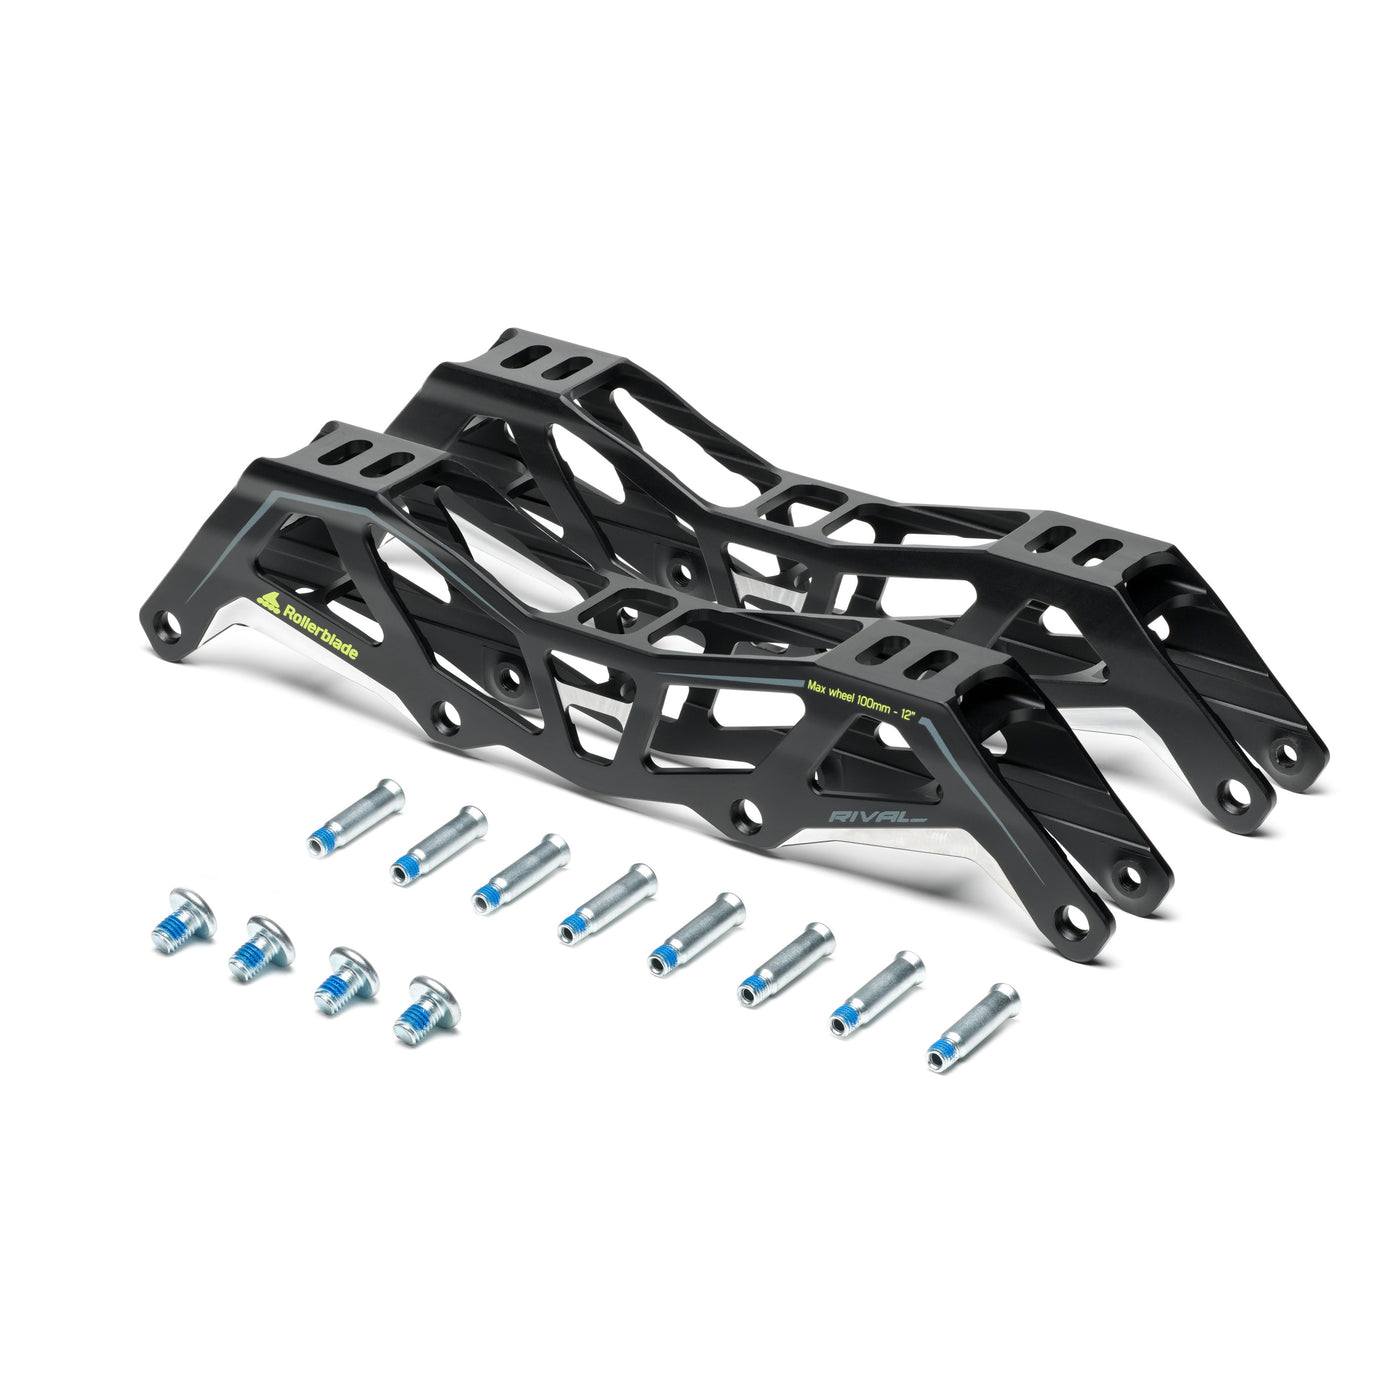 Rollerblade Rival 12" Frame - 4x100